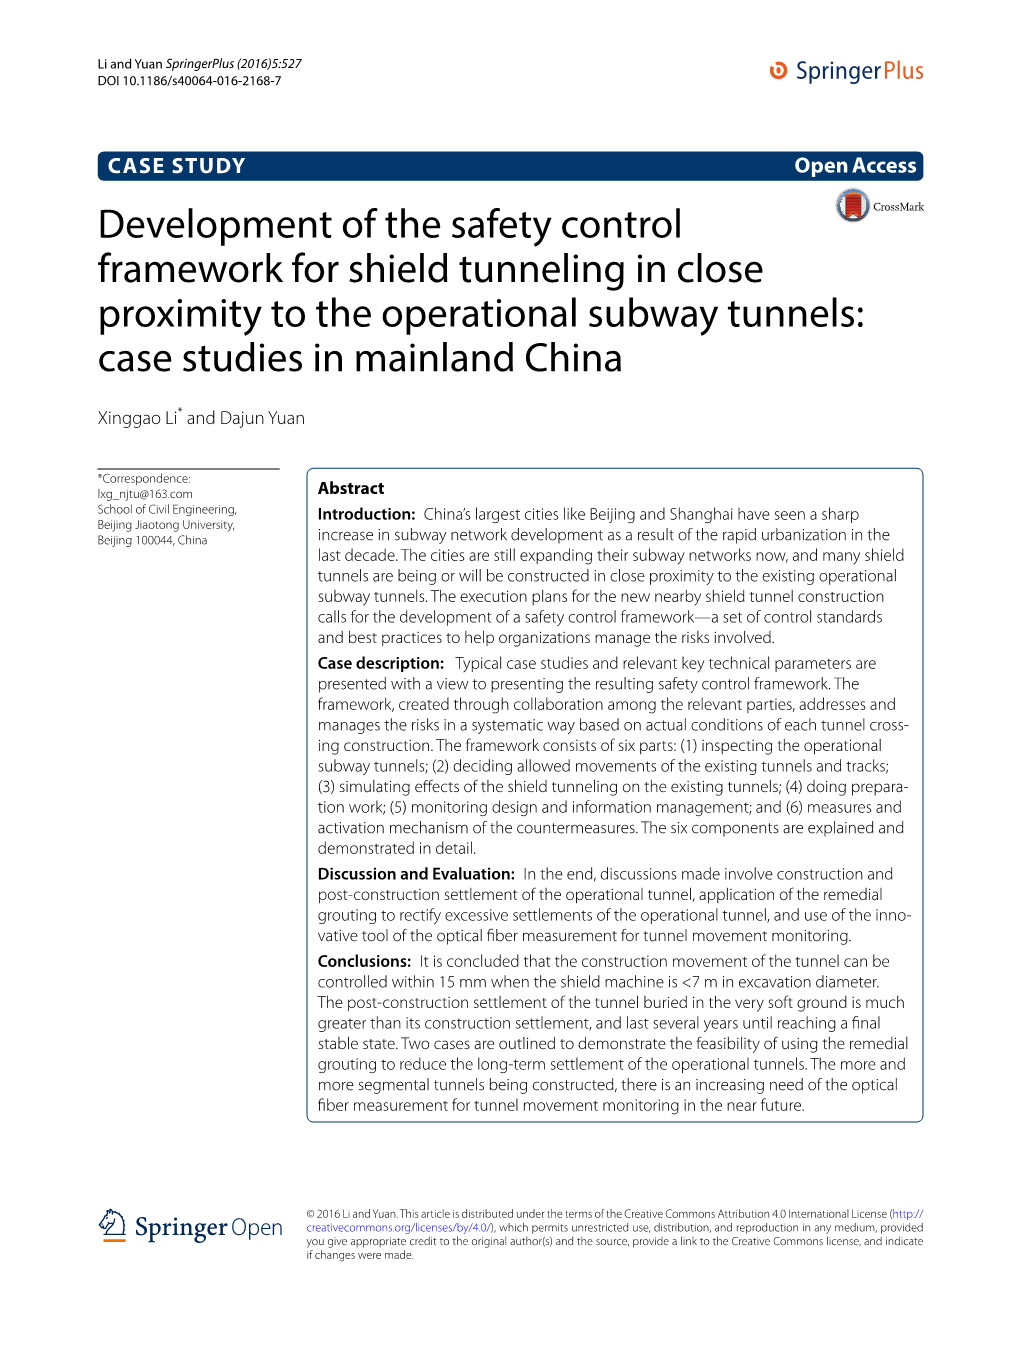 Development of the Safety Control Framework for Shield Tunneling in Close Proximity to the Operational Subway Tunnels: Case Studies in Mainland China